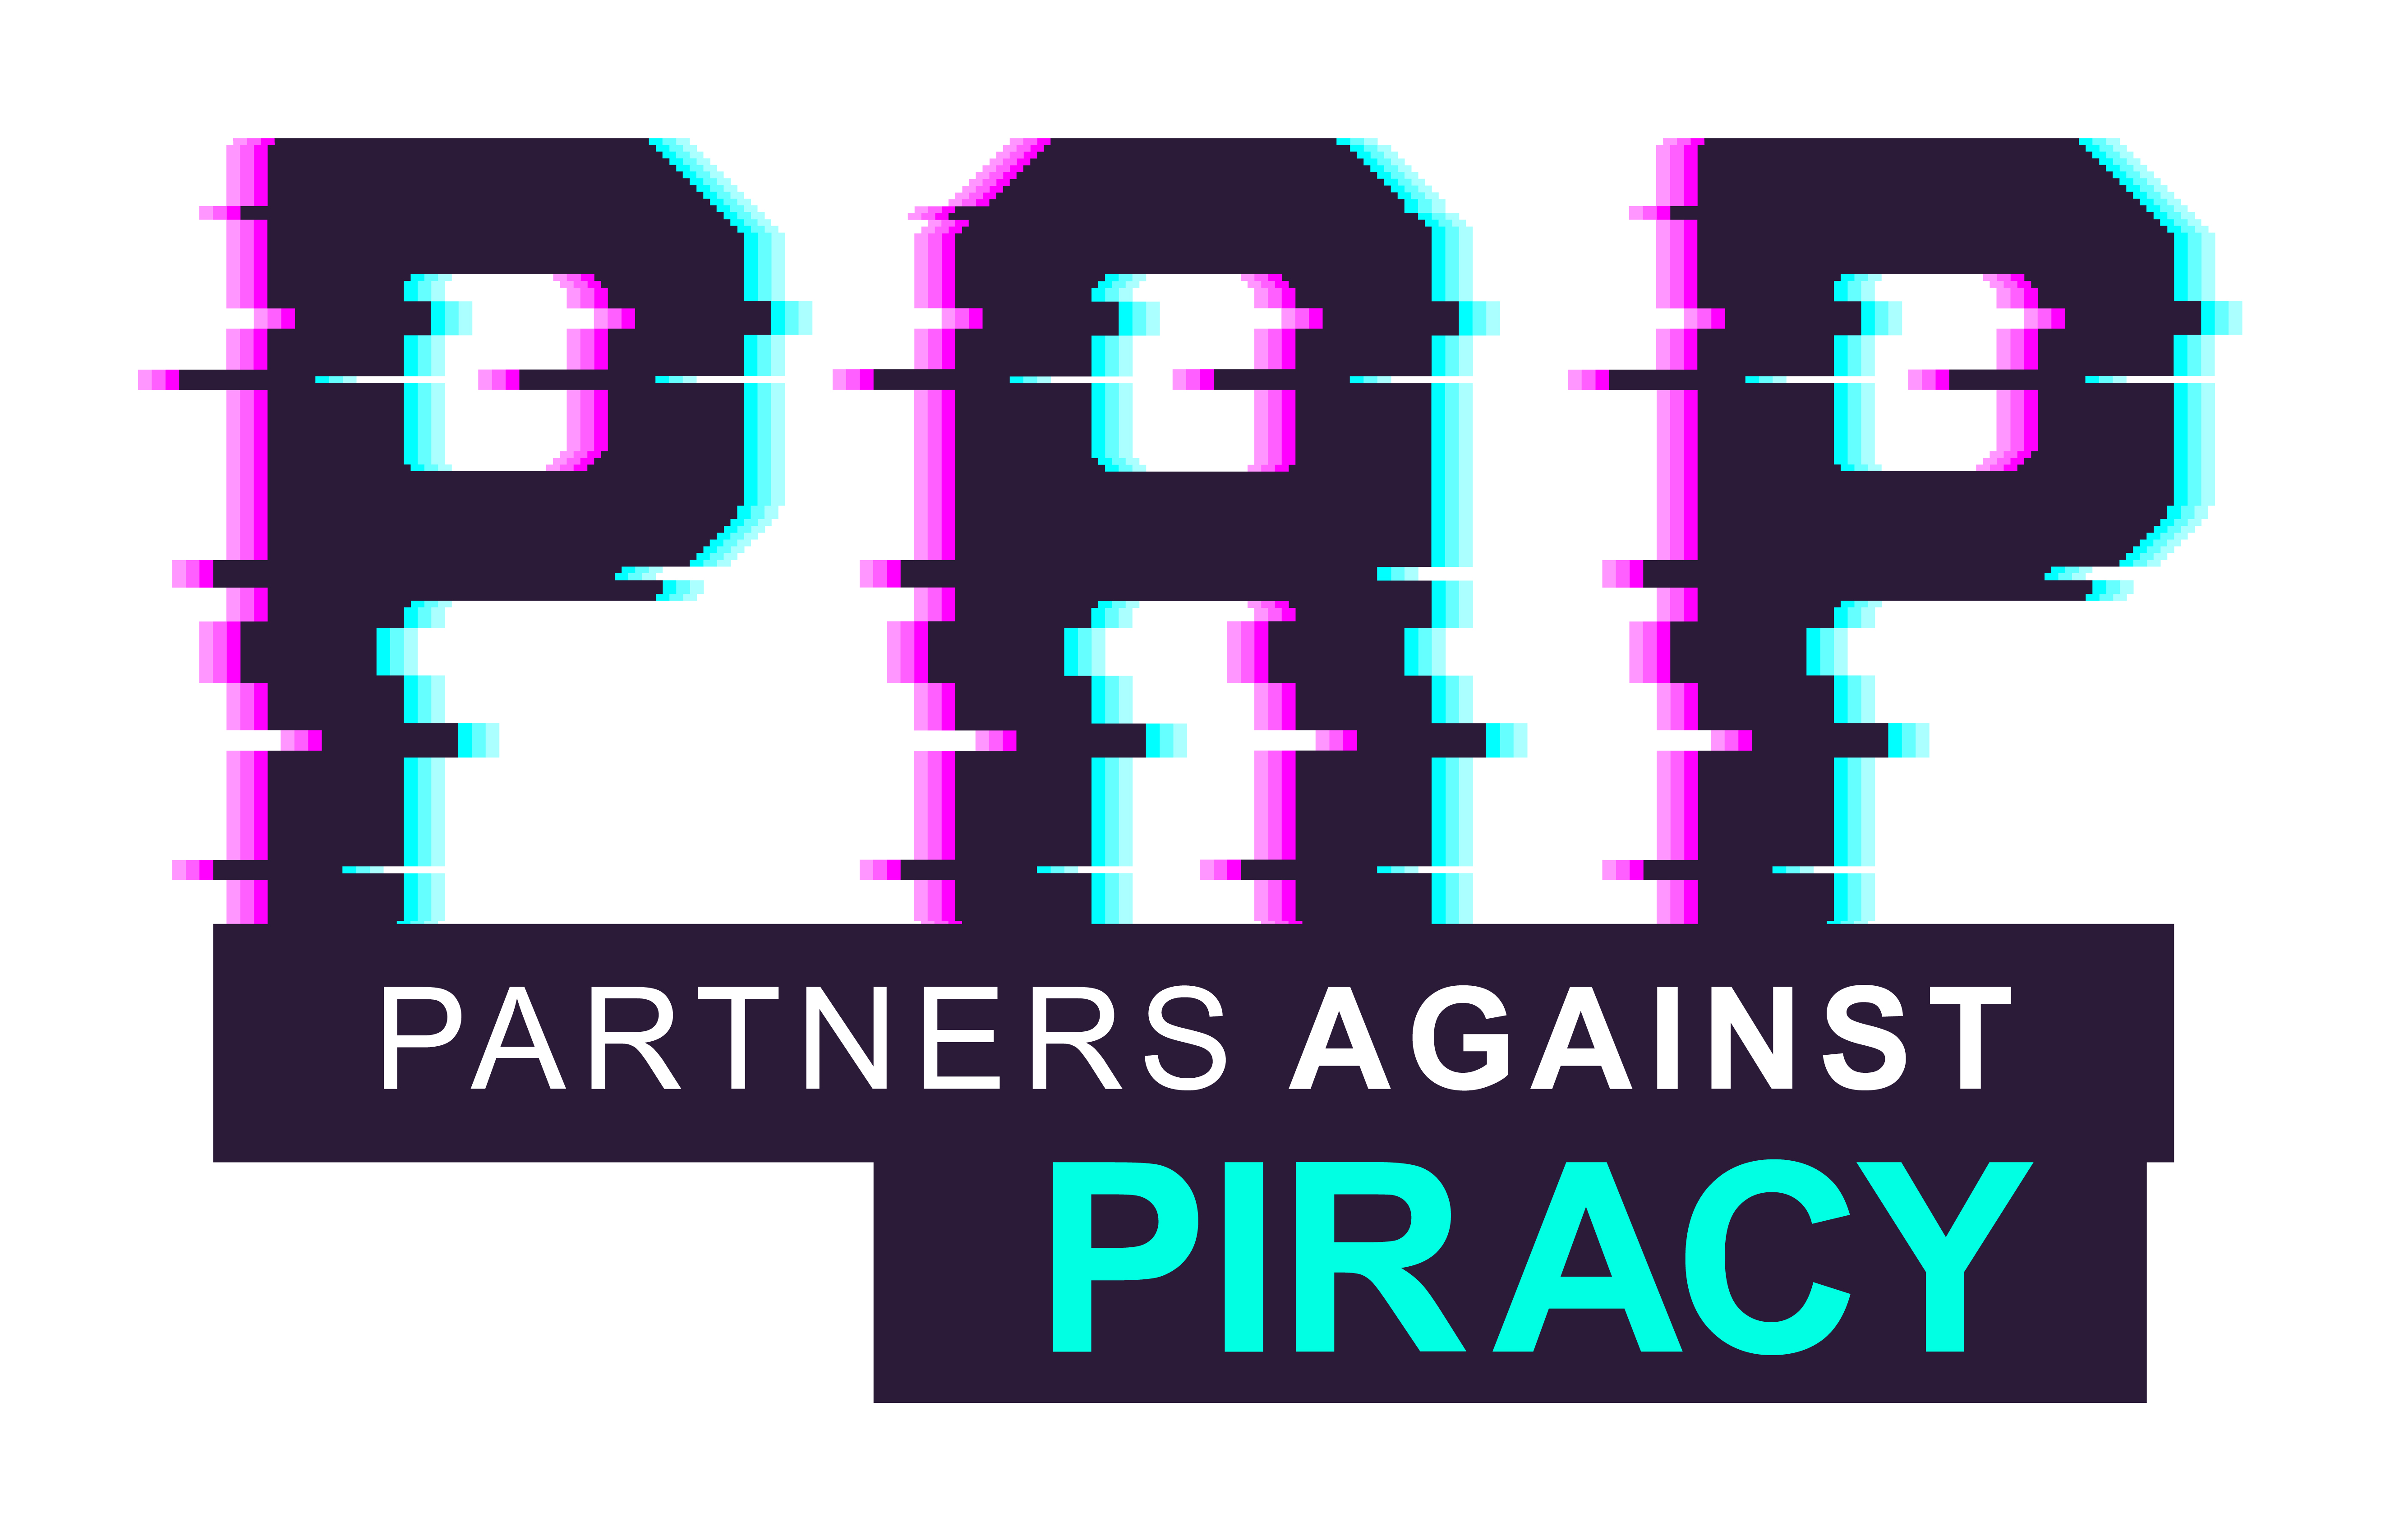 Partners Against Piracy